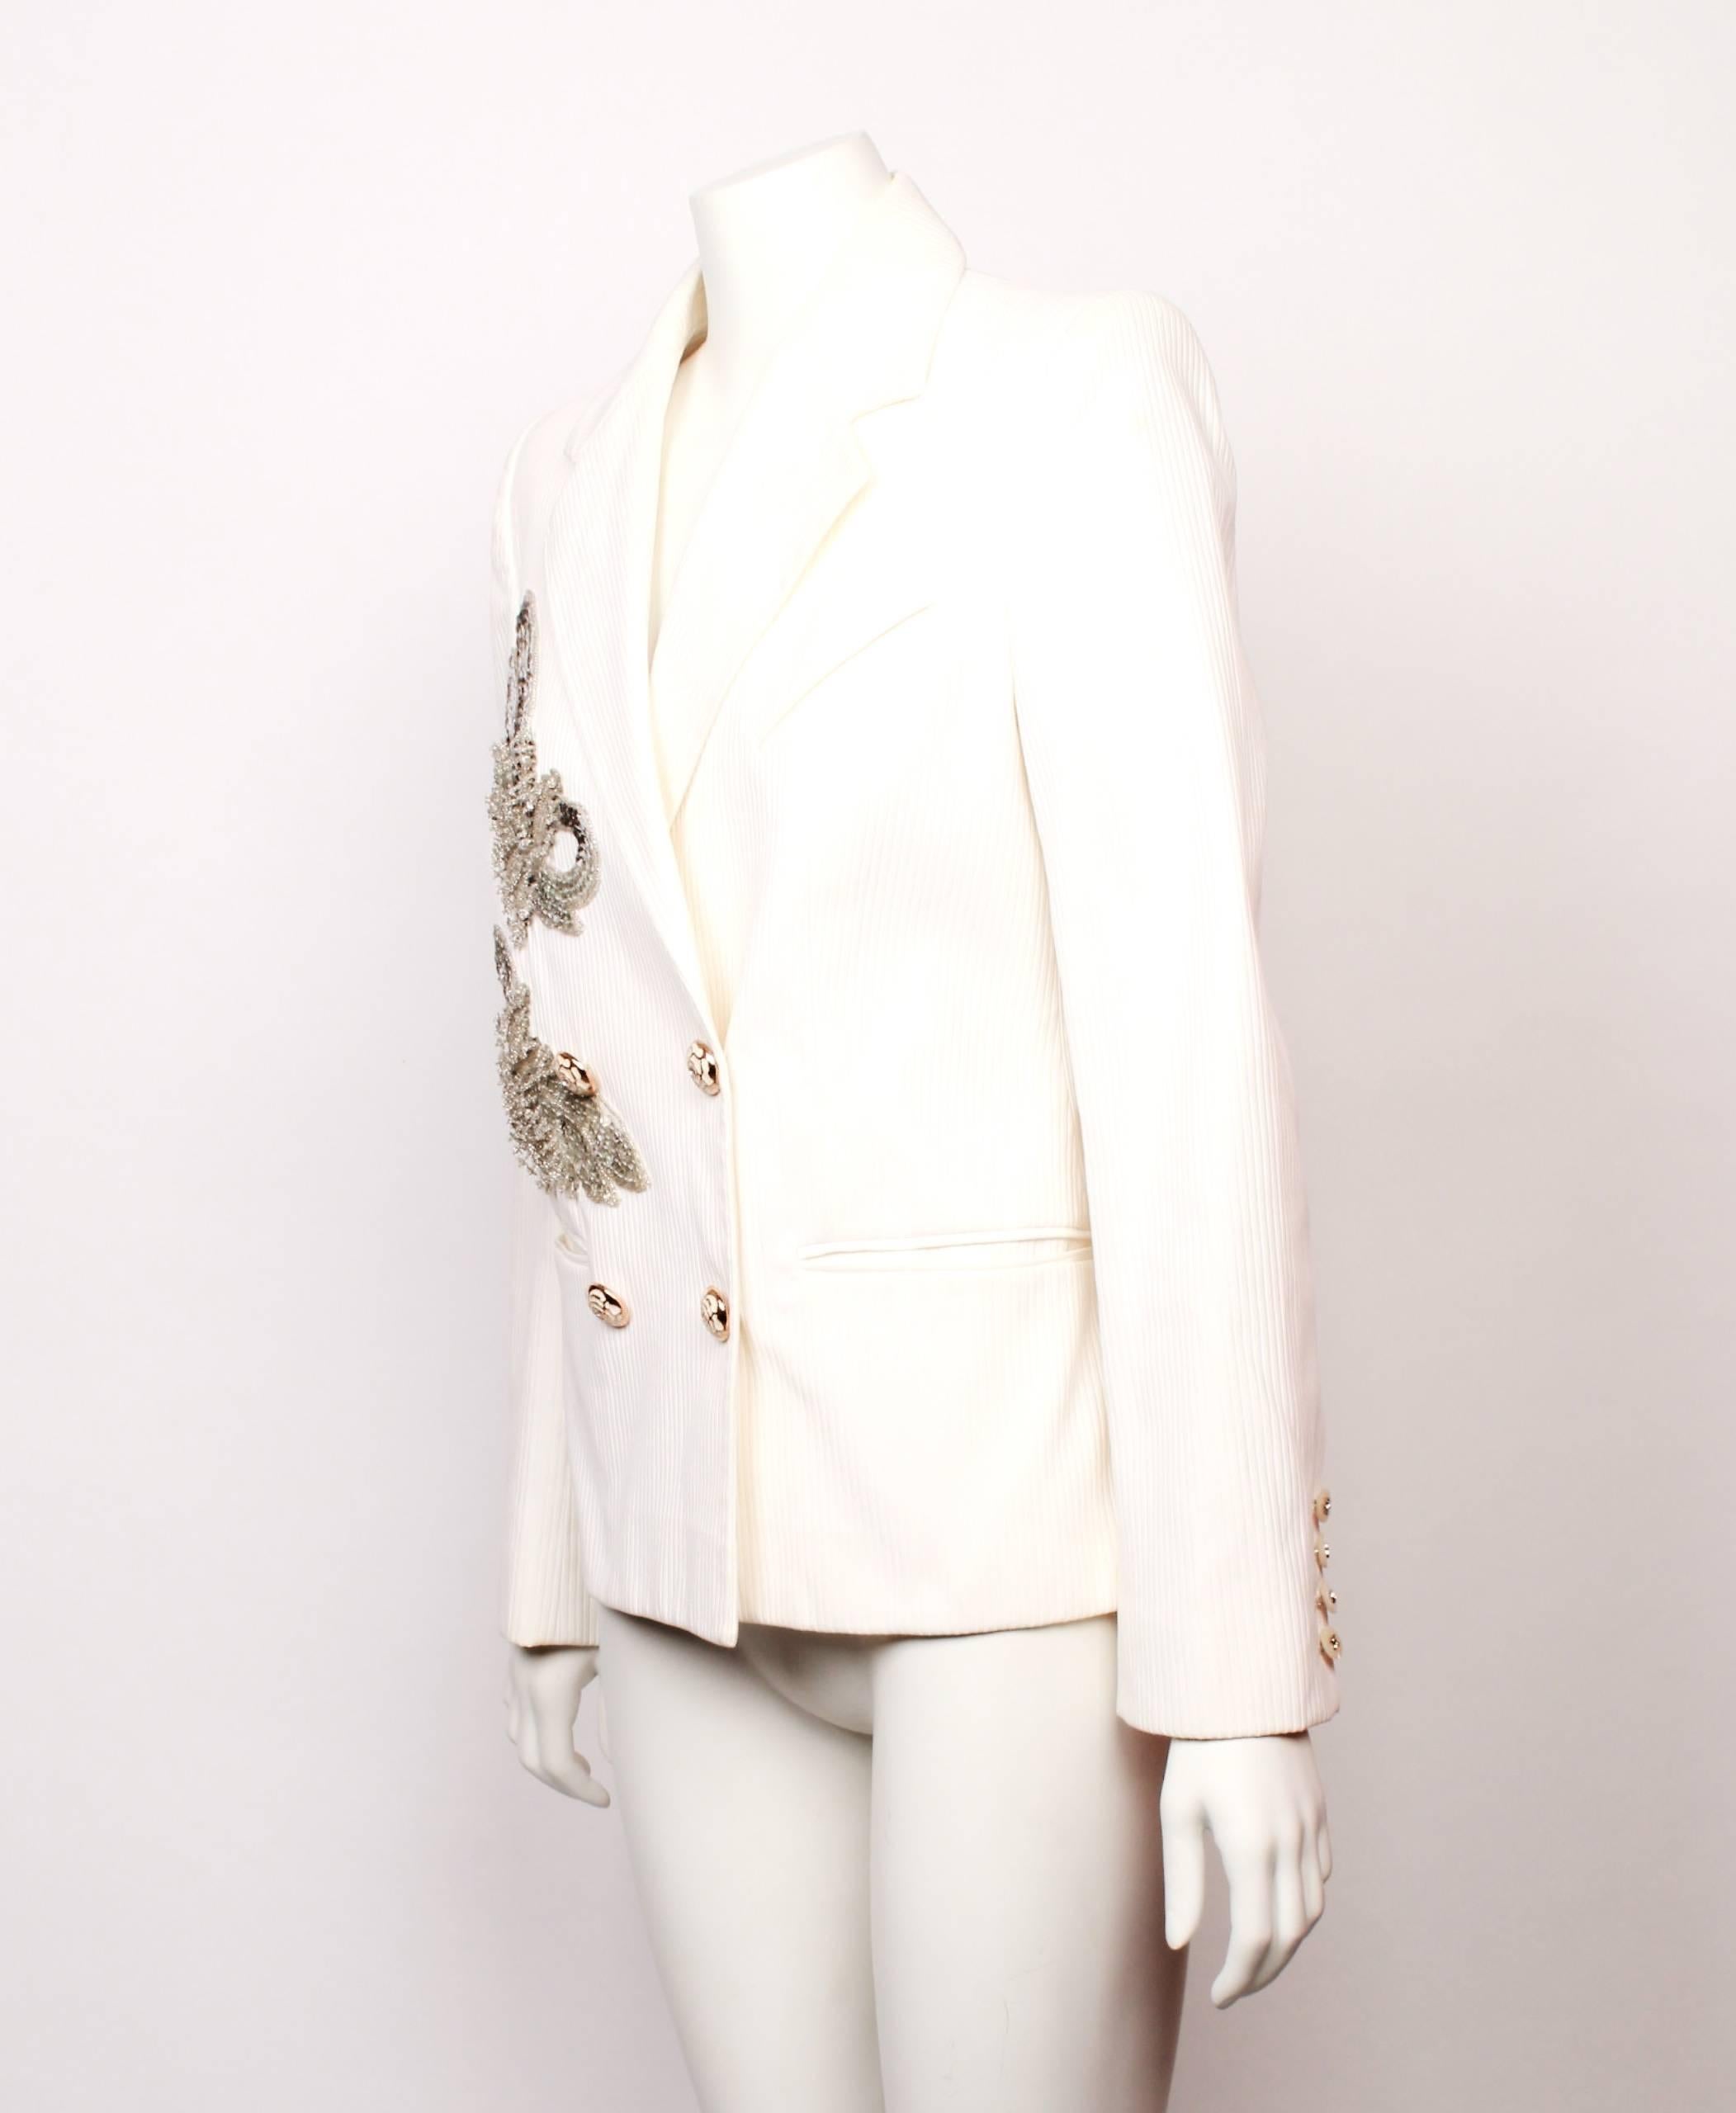 Chanel white faille ribbed jacket with two silver sequin leaf shaped motifs. Double breasted with beautiful and classic Chanel Camelia buttons in gold and white.
The jacket features two welt pockets at the hip and one breast pocket placed on the